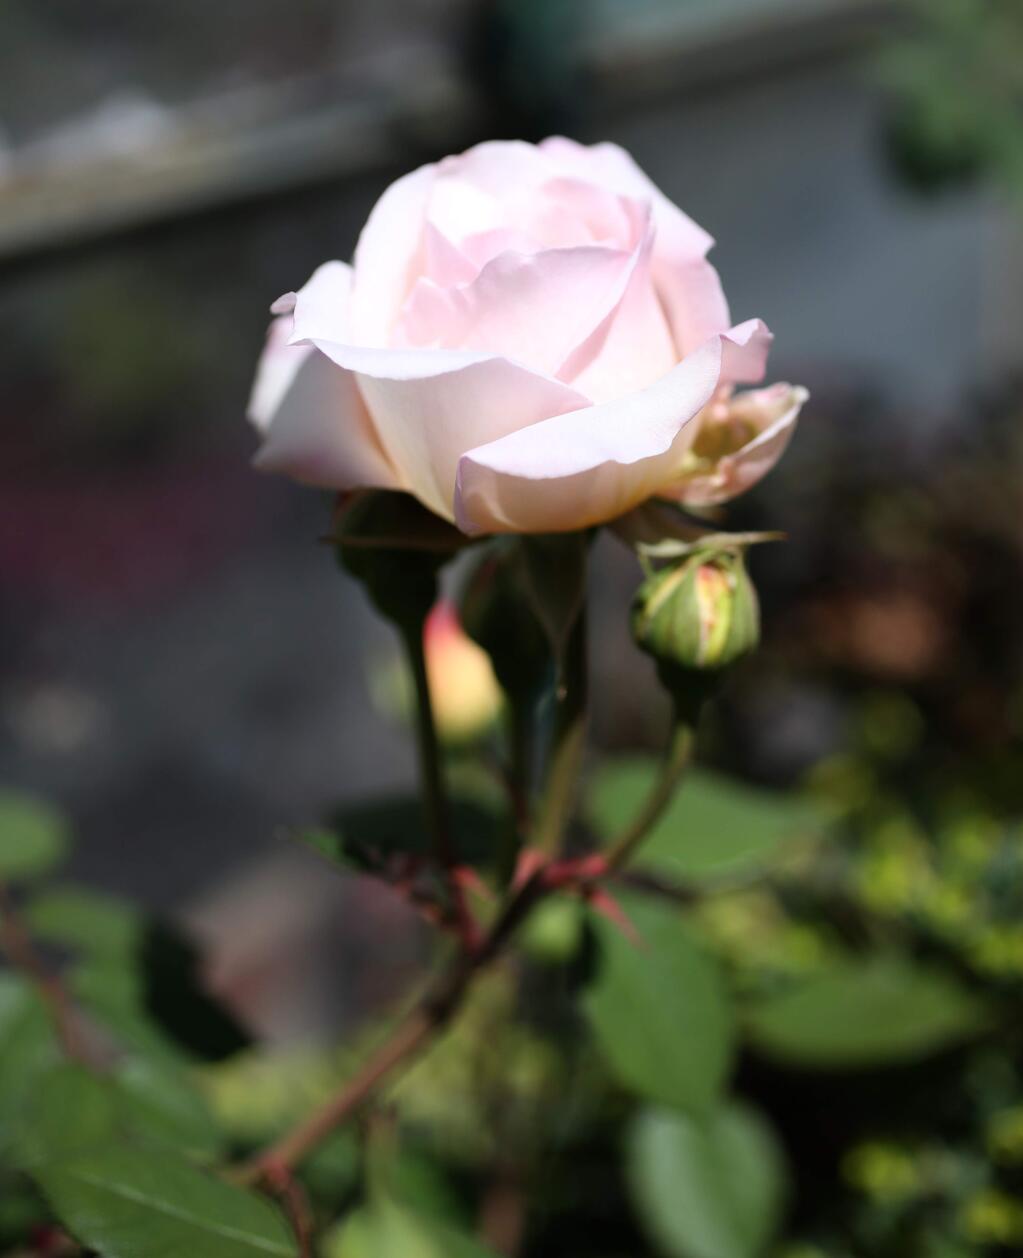 Rosa ‘Bredon' an early David Austin Rose in the garden of Maile and Warren Arnold, Friday, April 3, 2015. (Crista Jeremiason / The Press Democrat)